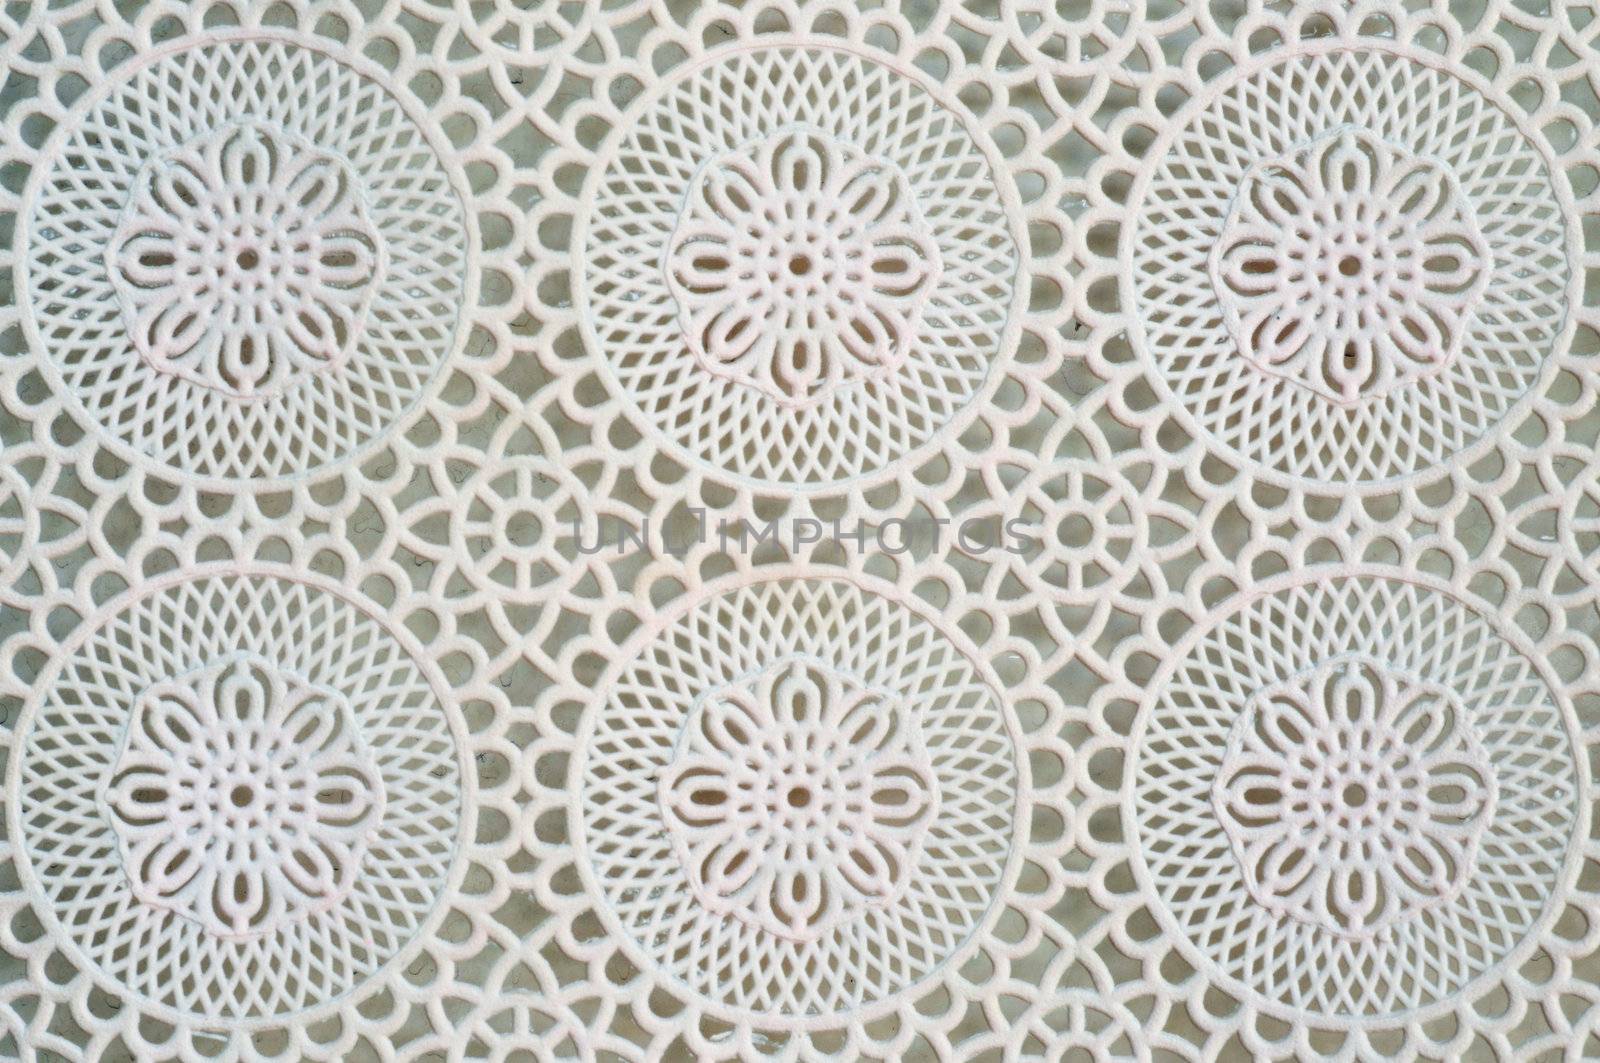 Lace is an openwork fabric, patterned with open holes in the work, made by machine or by hand.